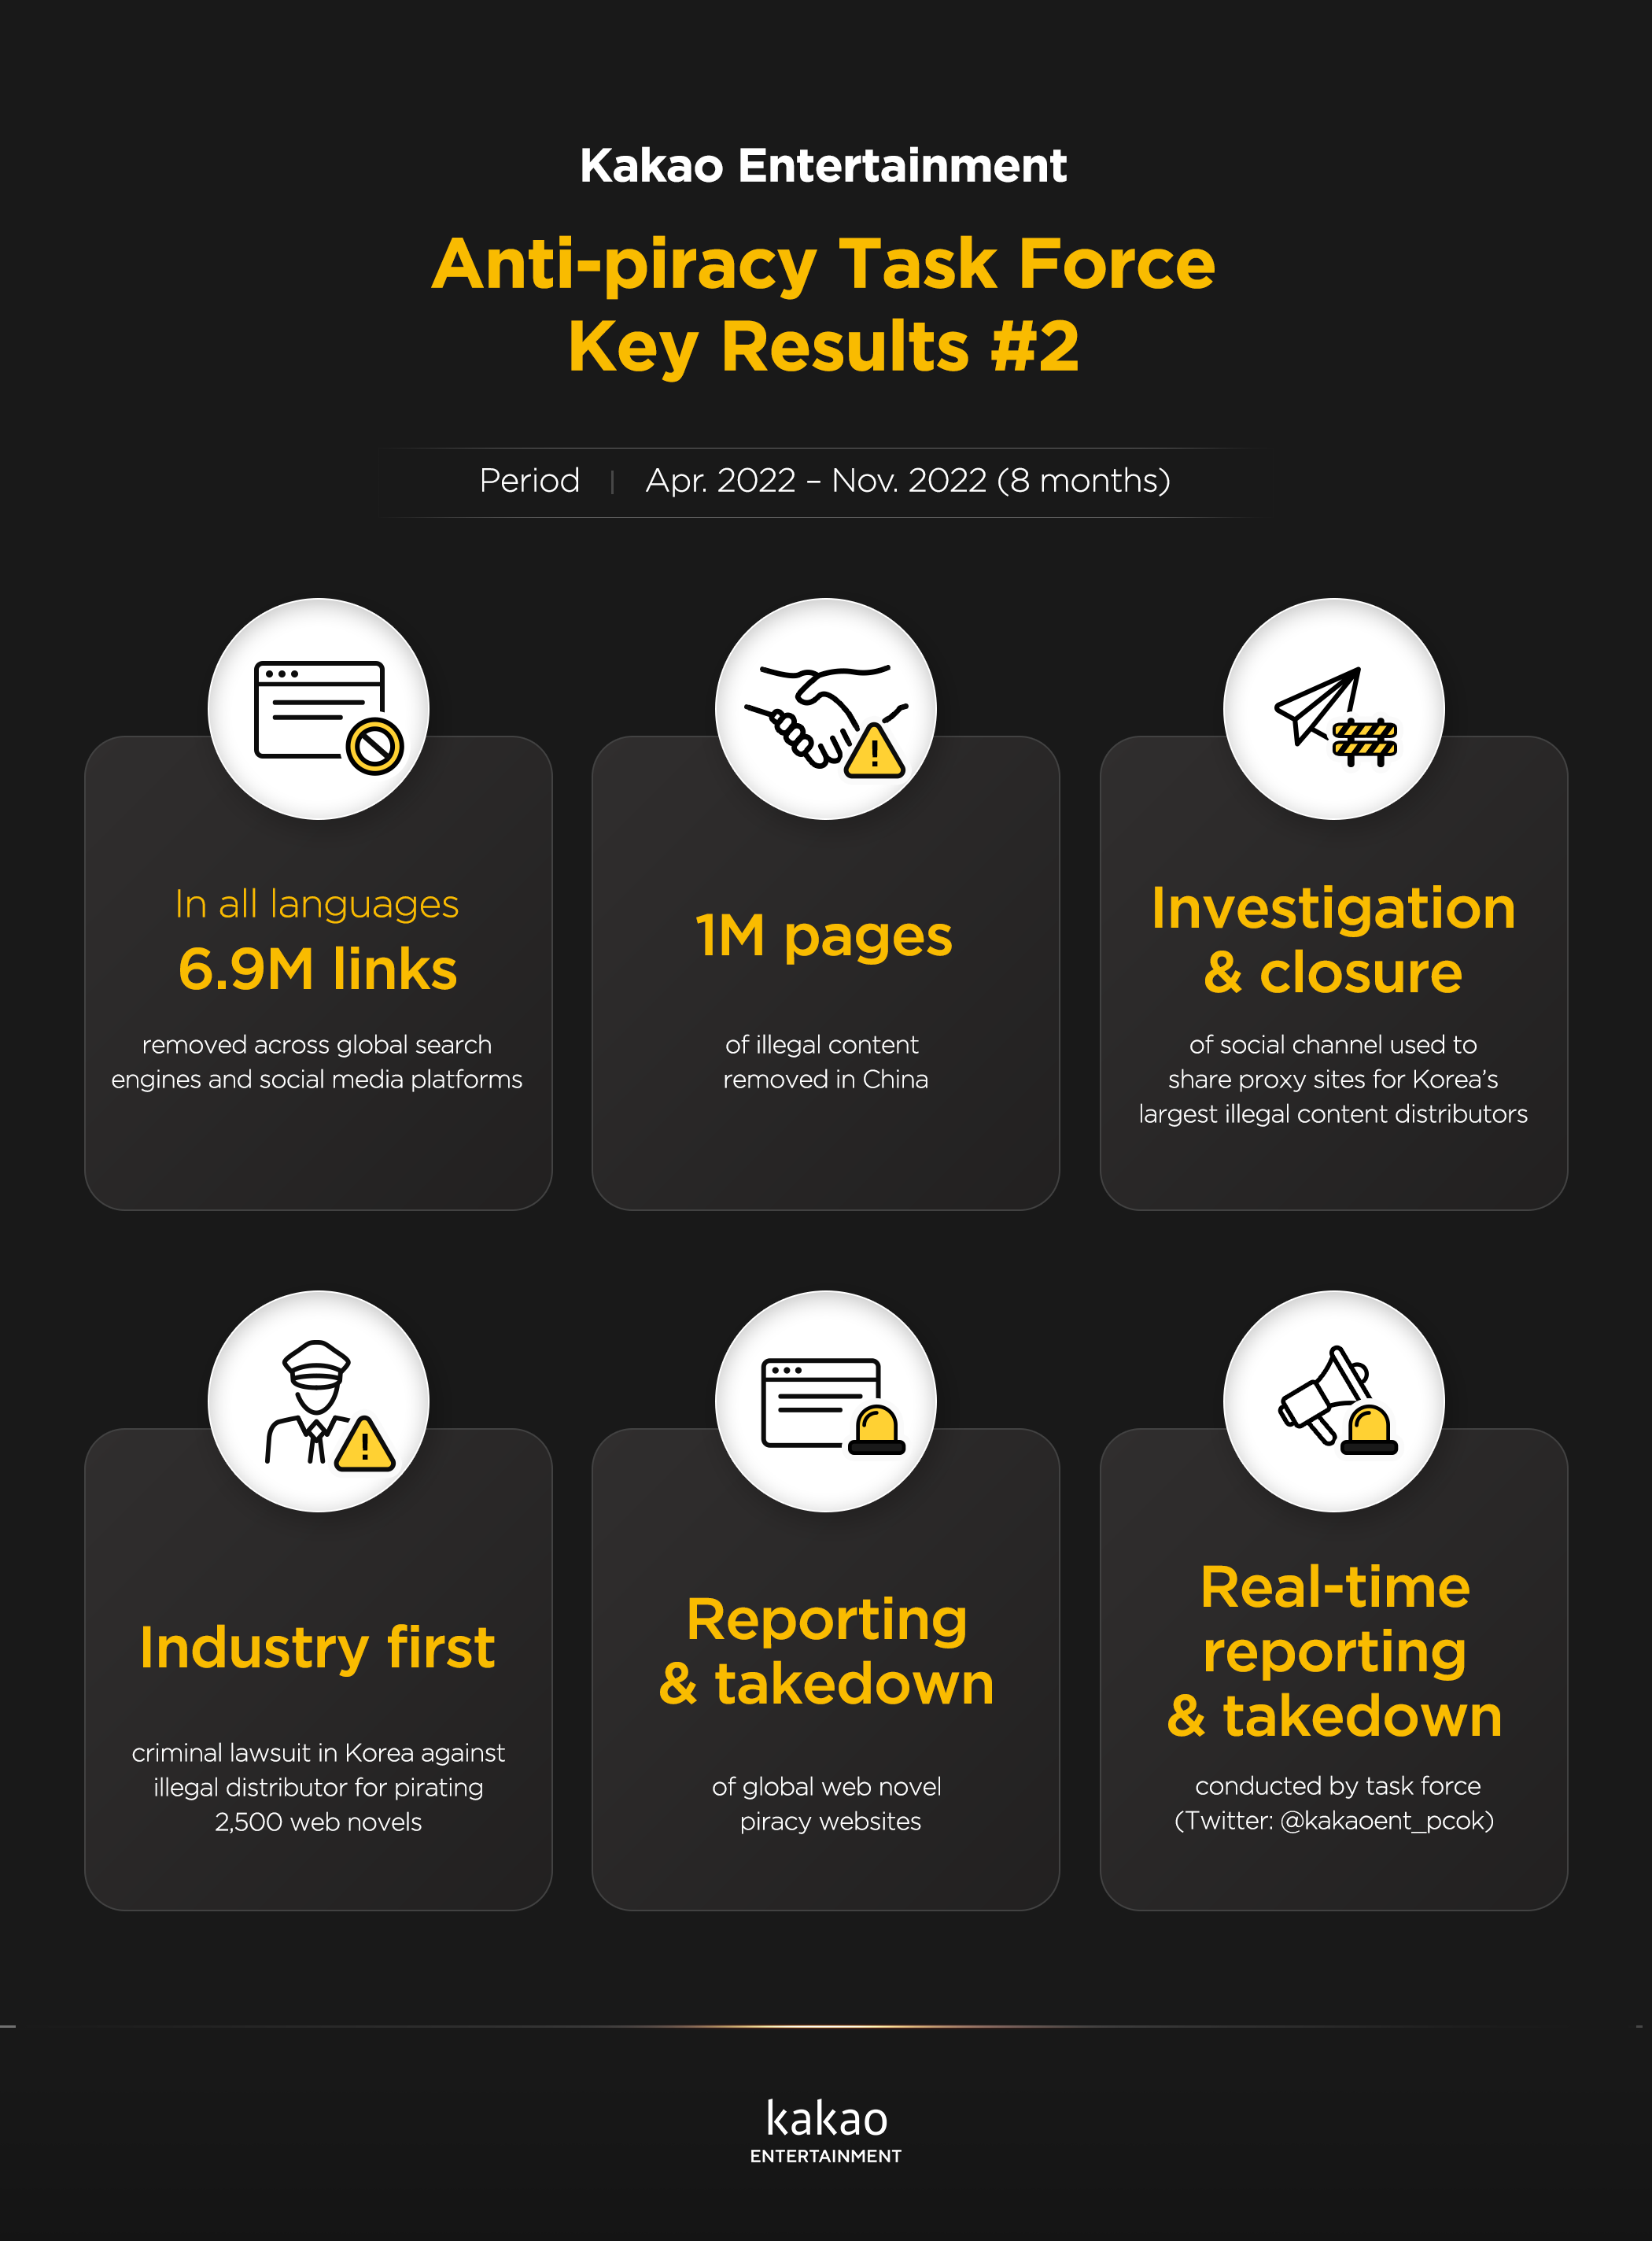 Key results of Kakao Entertainment's anti-piracy white paper on webtoons and web novels